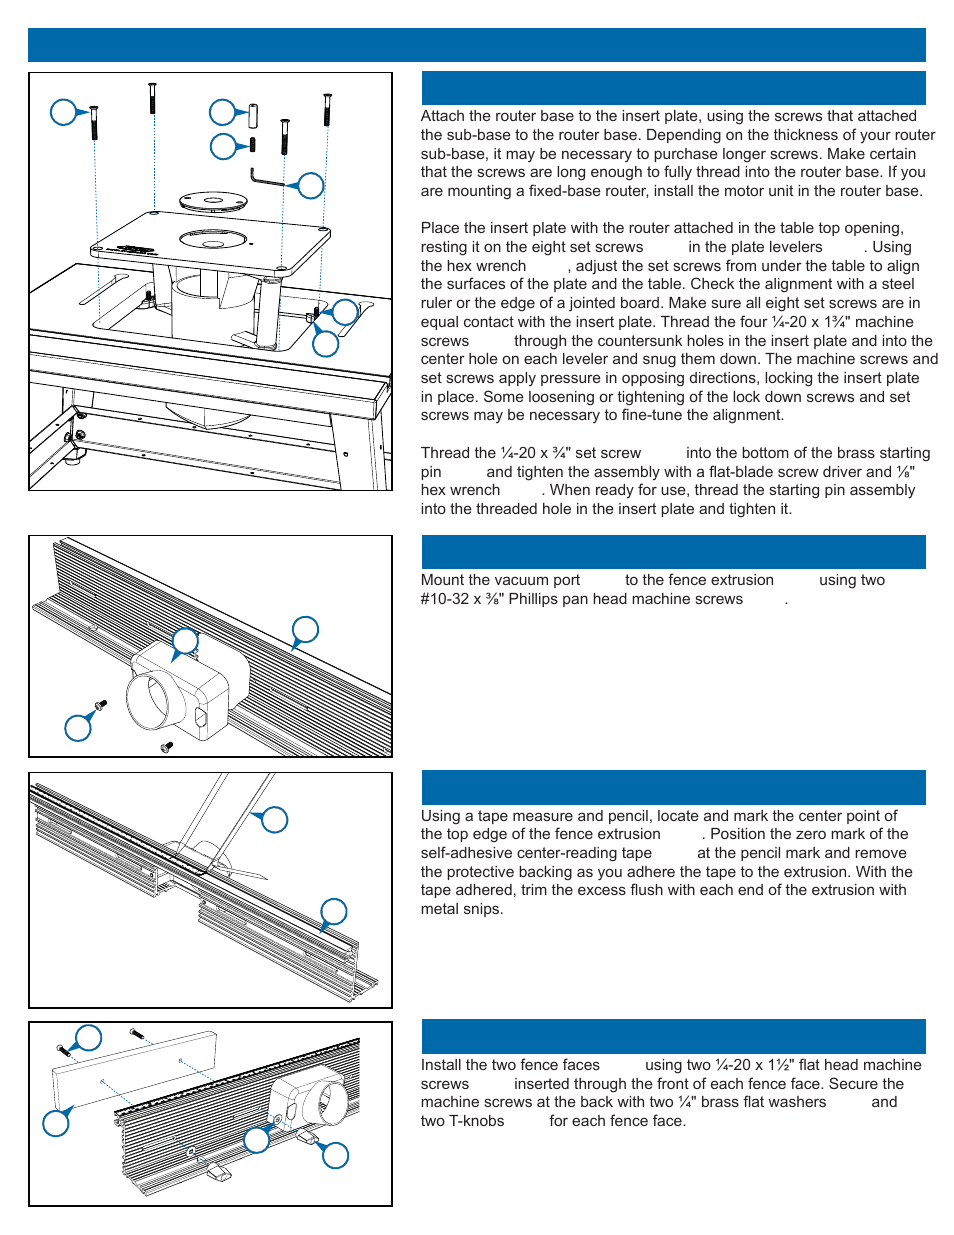 Benchtop router table assembly instructions | Kreg PRS2100 Precision Benchtop Router Table User Manual | Page 7 / 28